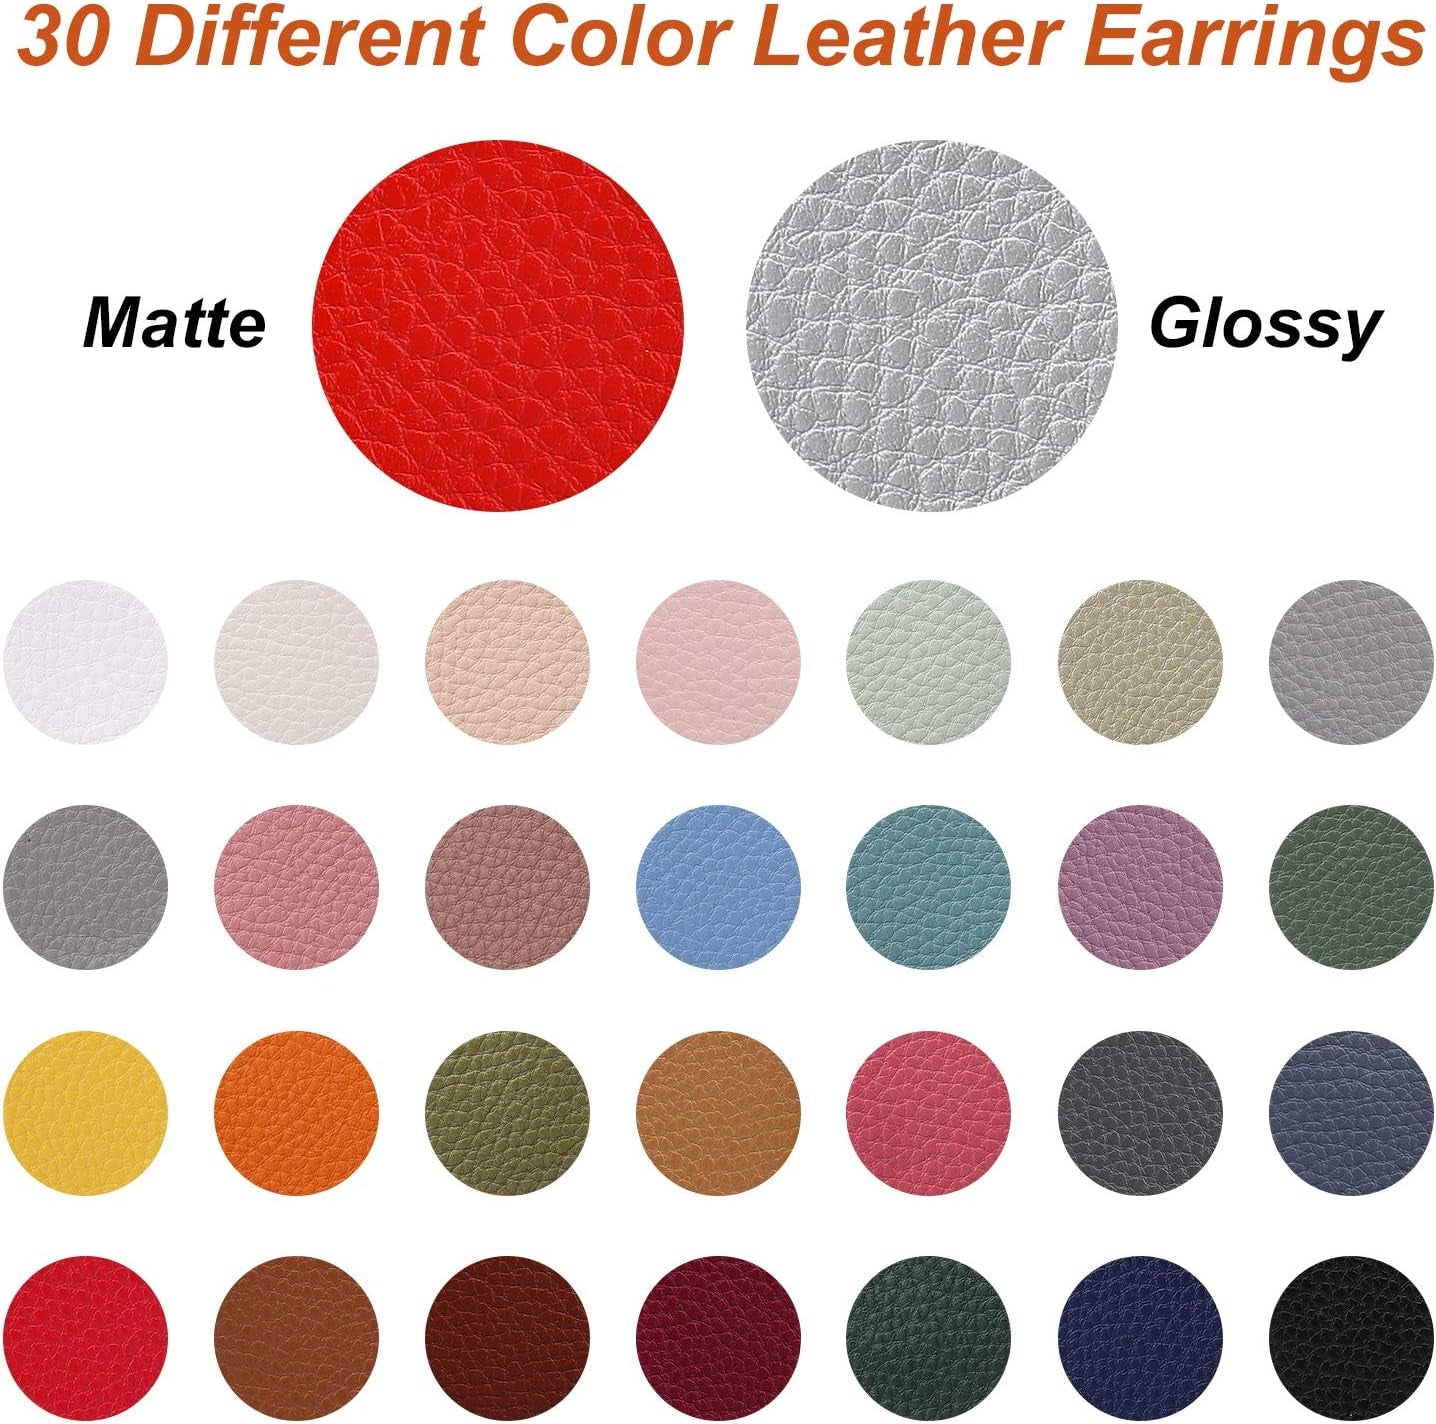 30 Pairs of Teardrop Double-Sided Leather Earrings with 30 Color for Women Girls Jewelry Fashion and Valentine Birthday Party Gift